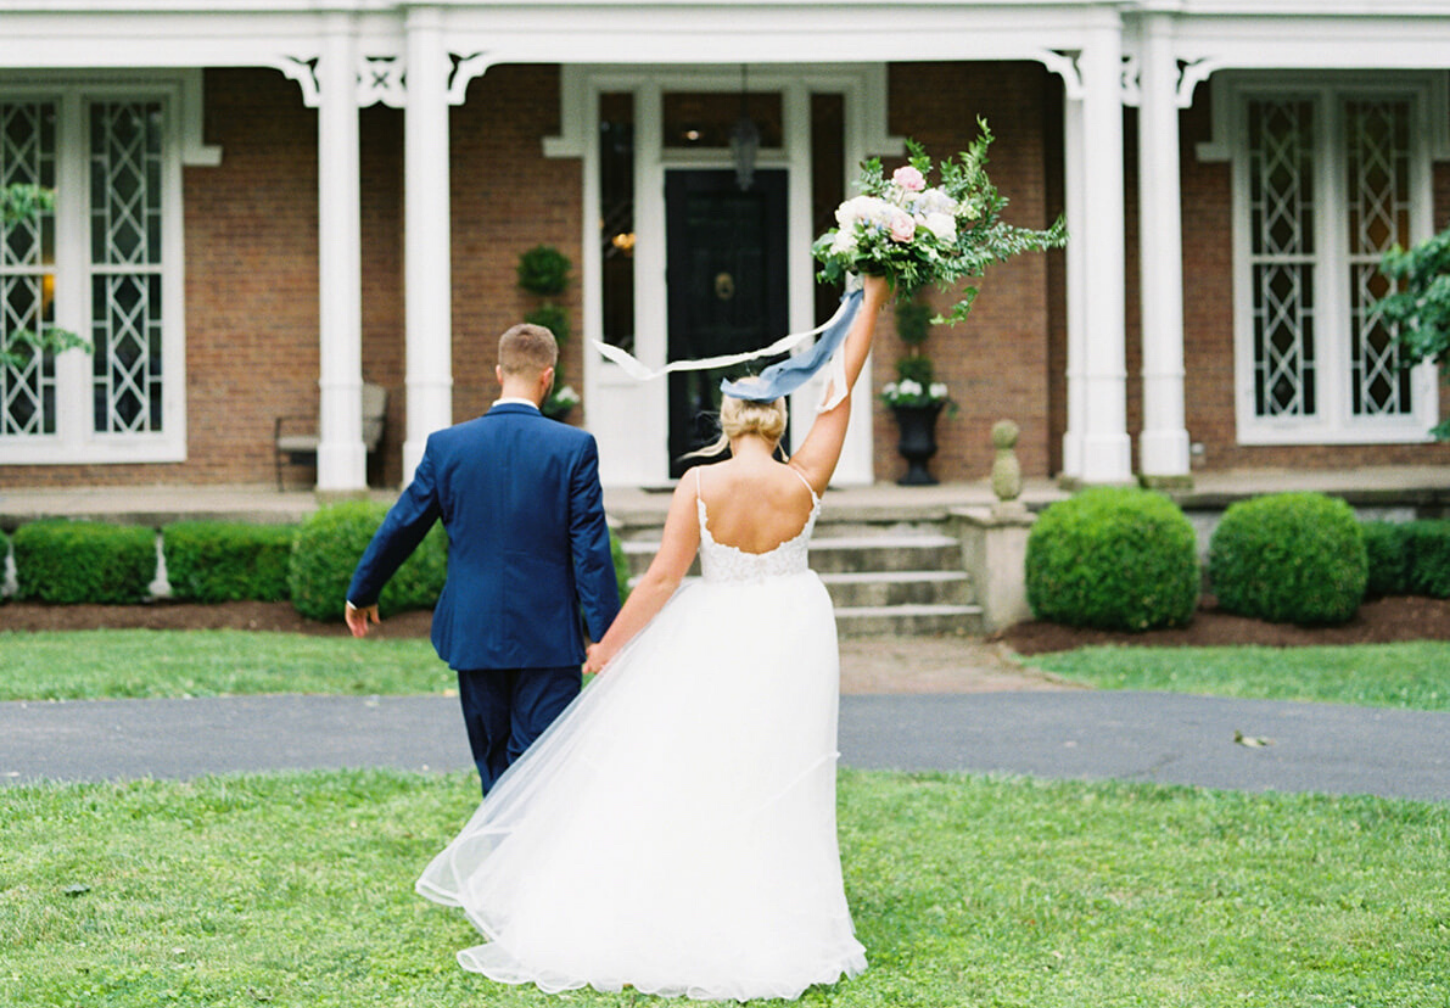 Tips on how to pick a wedding date from the team at Warrenwood Manor